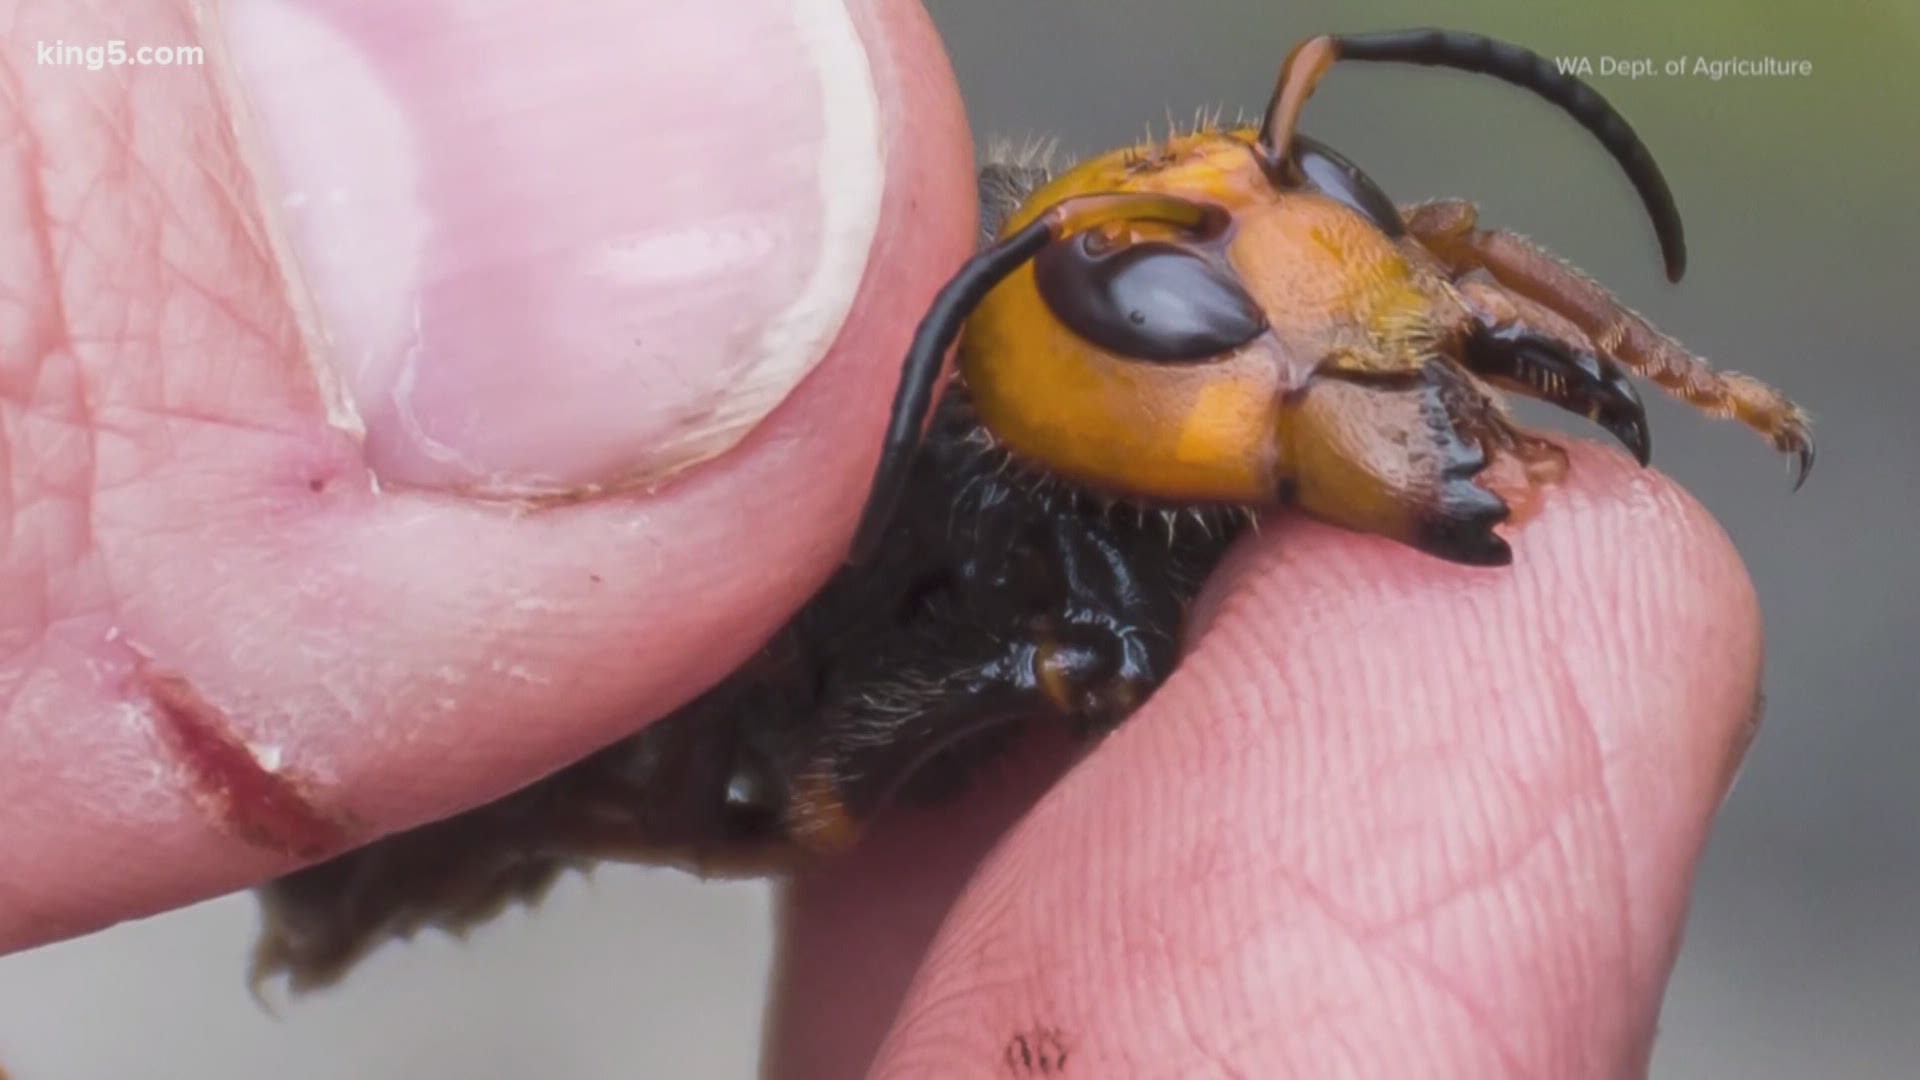 For the first time, researchers in Washington caught an Asian giant hornet in a trap near Birch Bay in Whatcom County. The invasive species threatens honey bees.